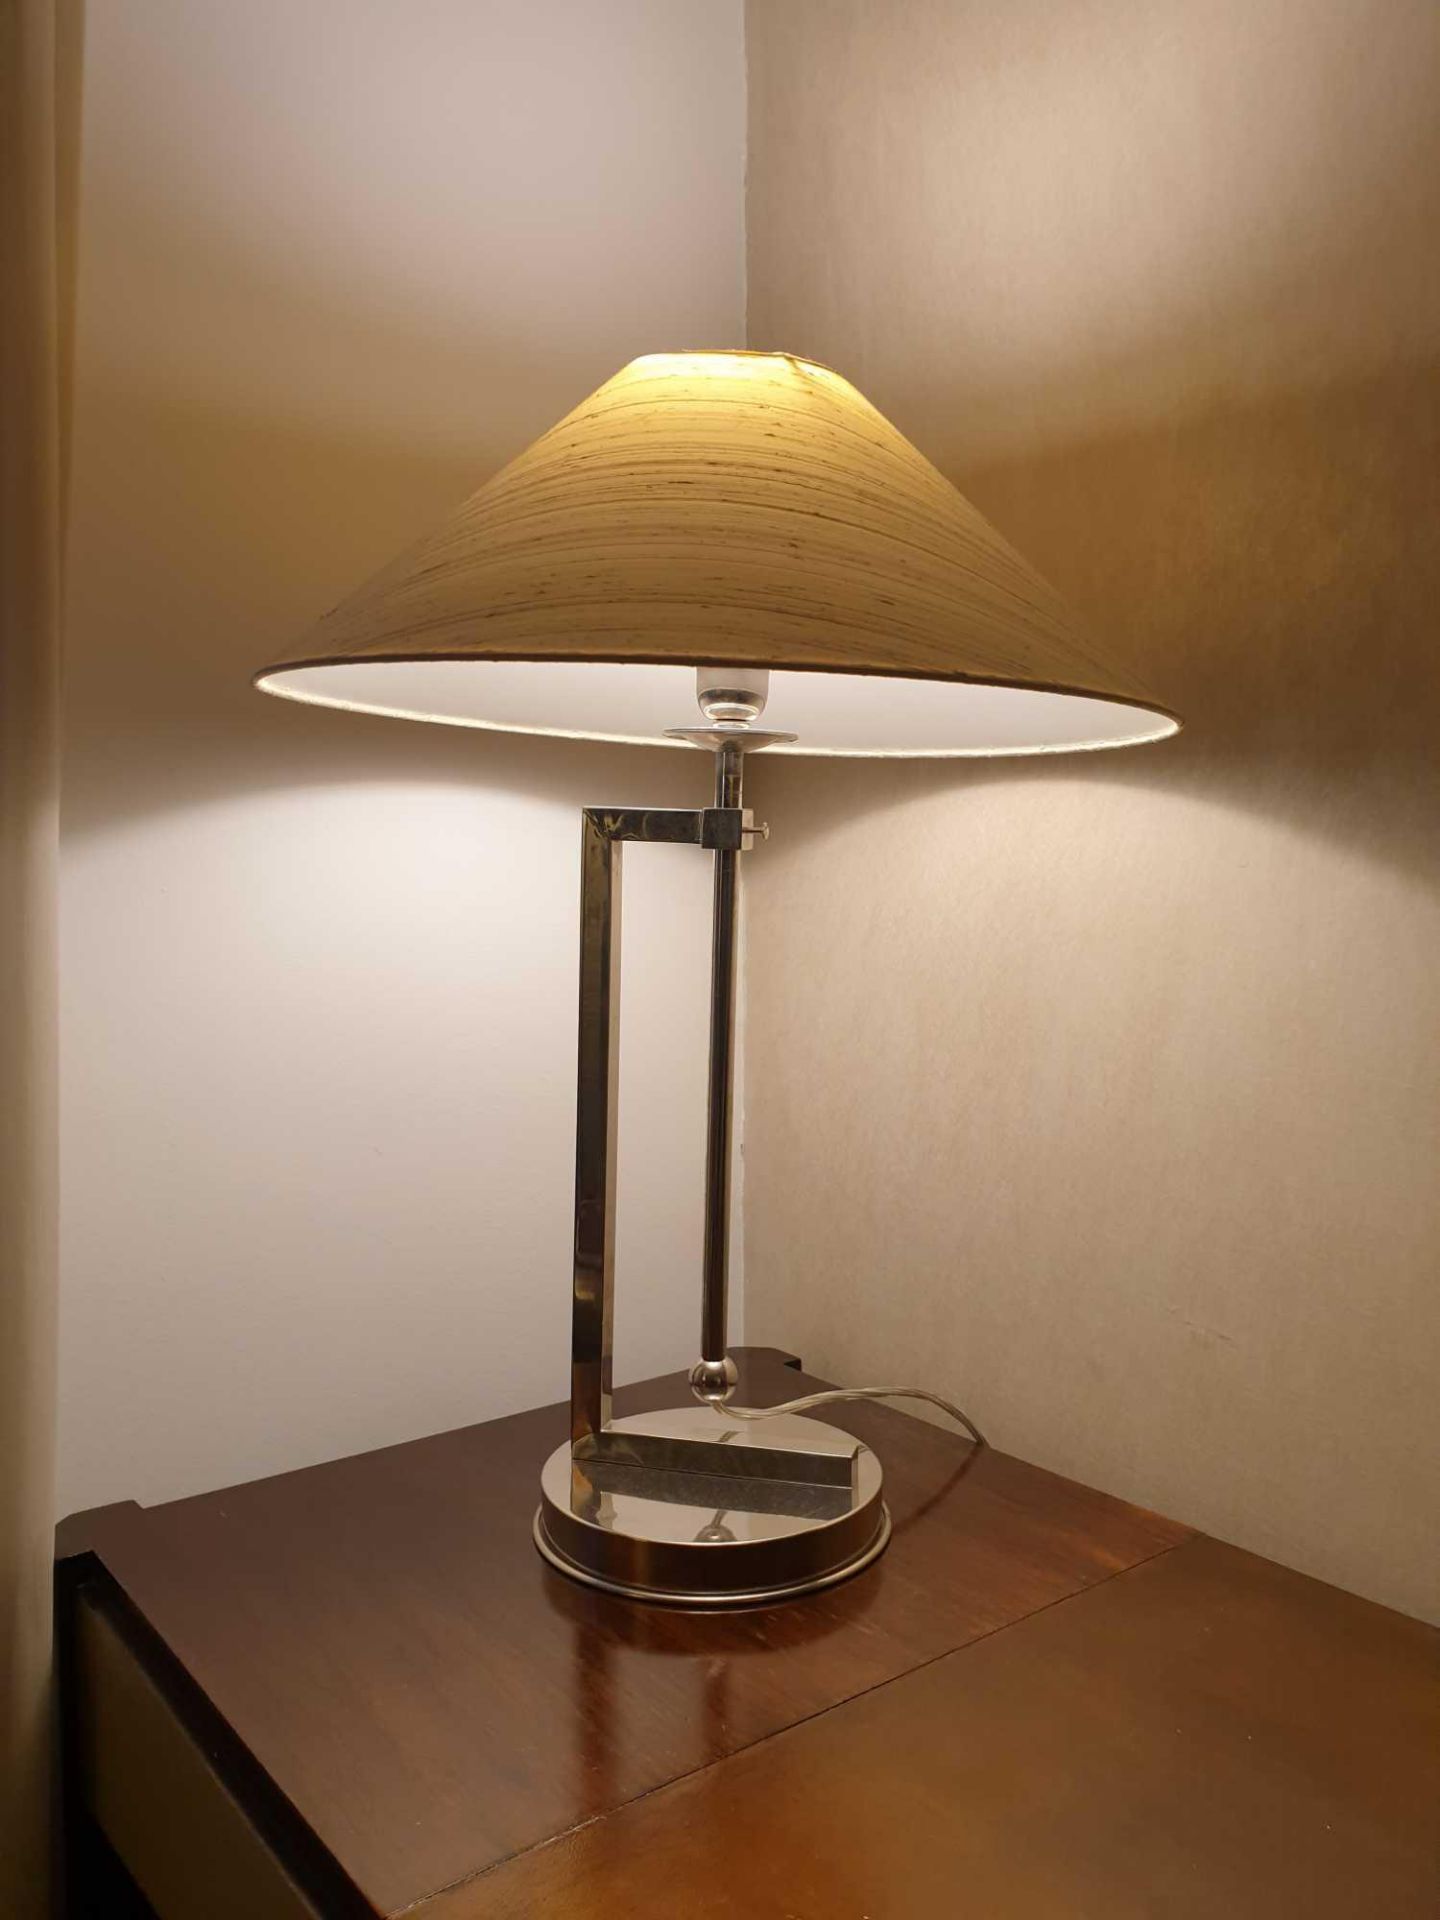 A Pair Of Polished Nickel Table Lamps Circular Base And Double Stem Single Bulb With Cylindrical - Image 2 of 2